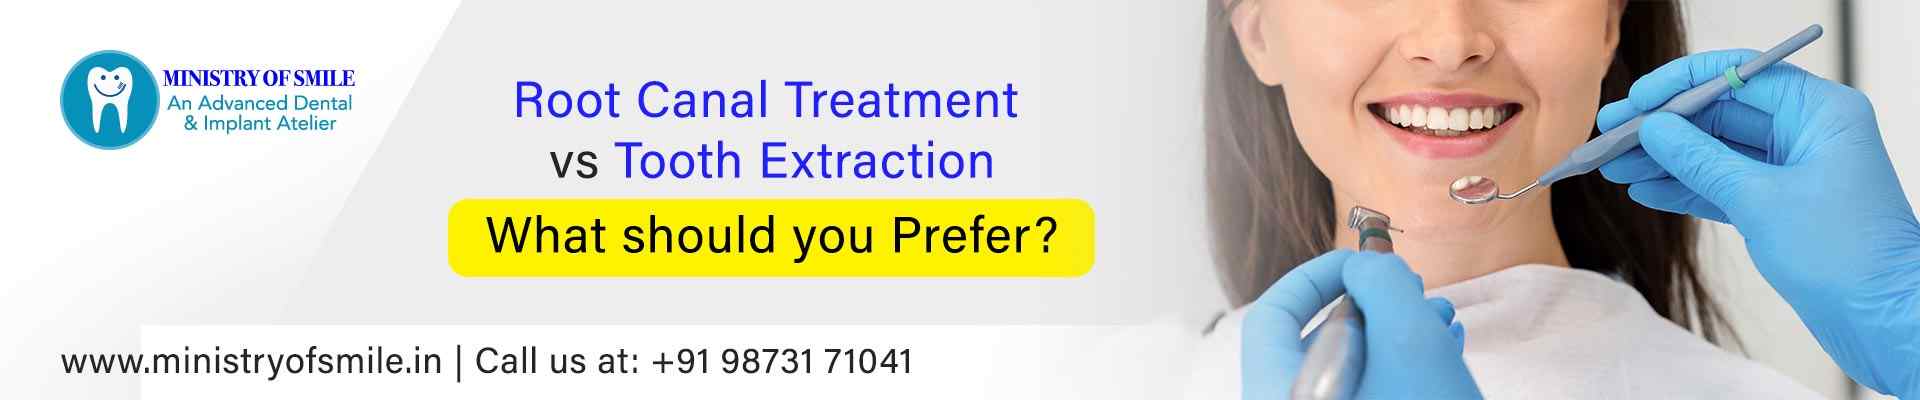 Root Canal Treatment VS Tooth Extraction: What should you Prefer